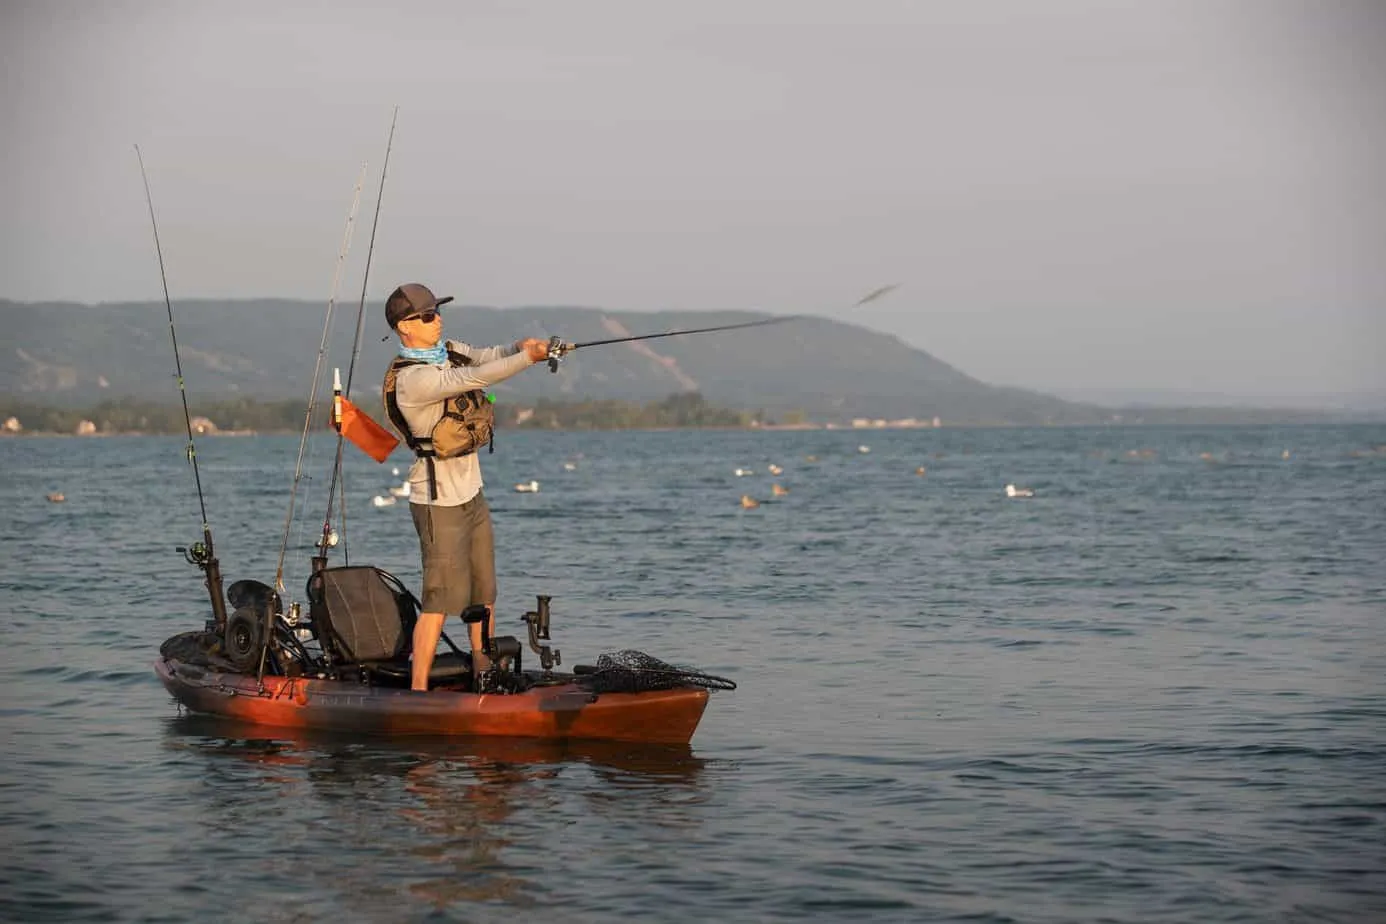 KayakFishing2 1536x1024 1 Health Benefits Of Fishing: 13 Positive Physical and Mental Effects